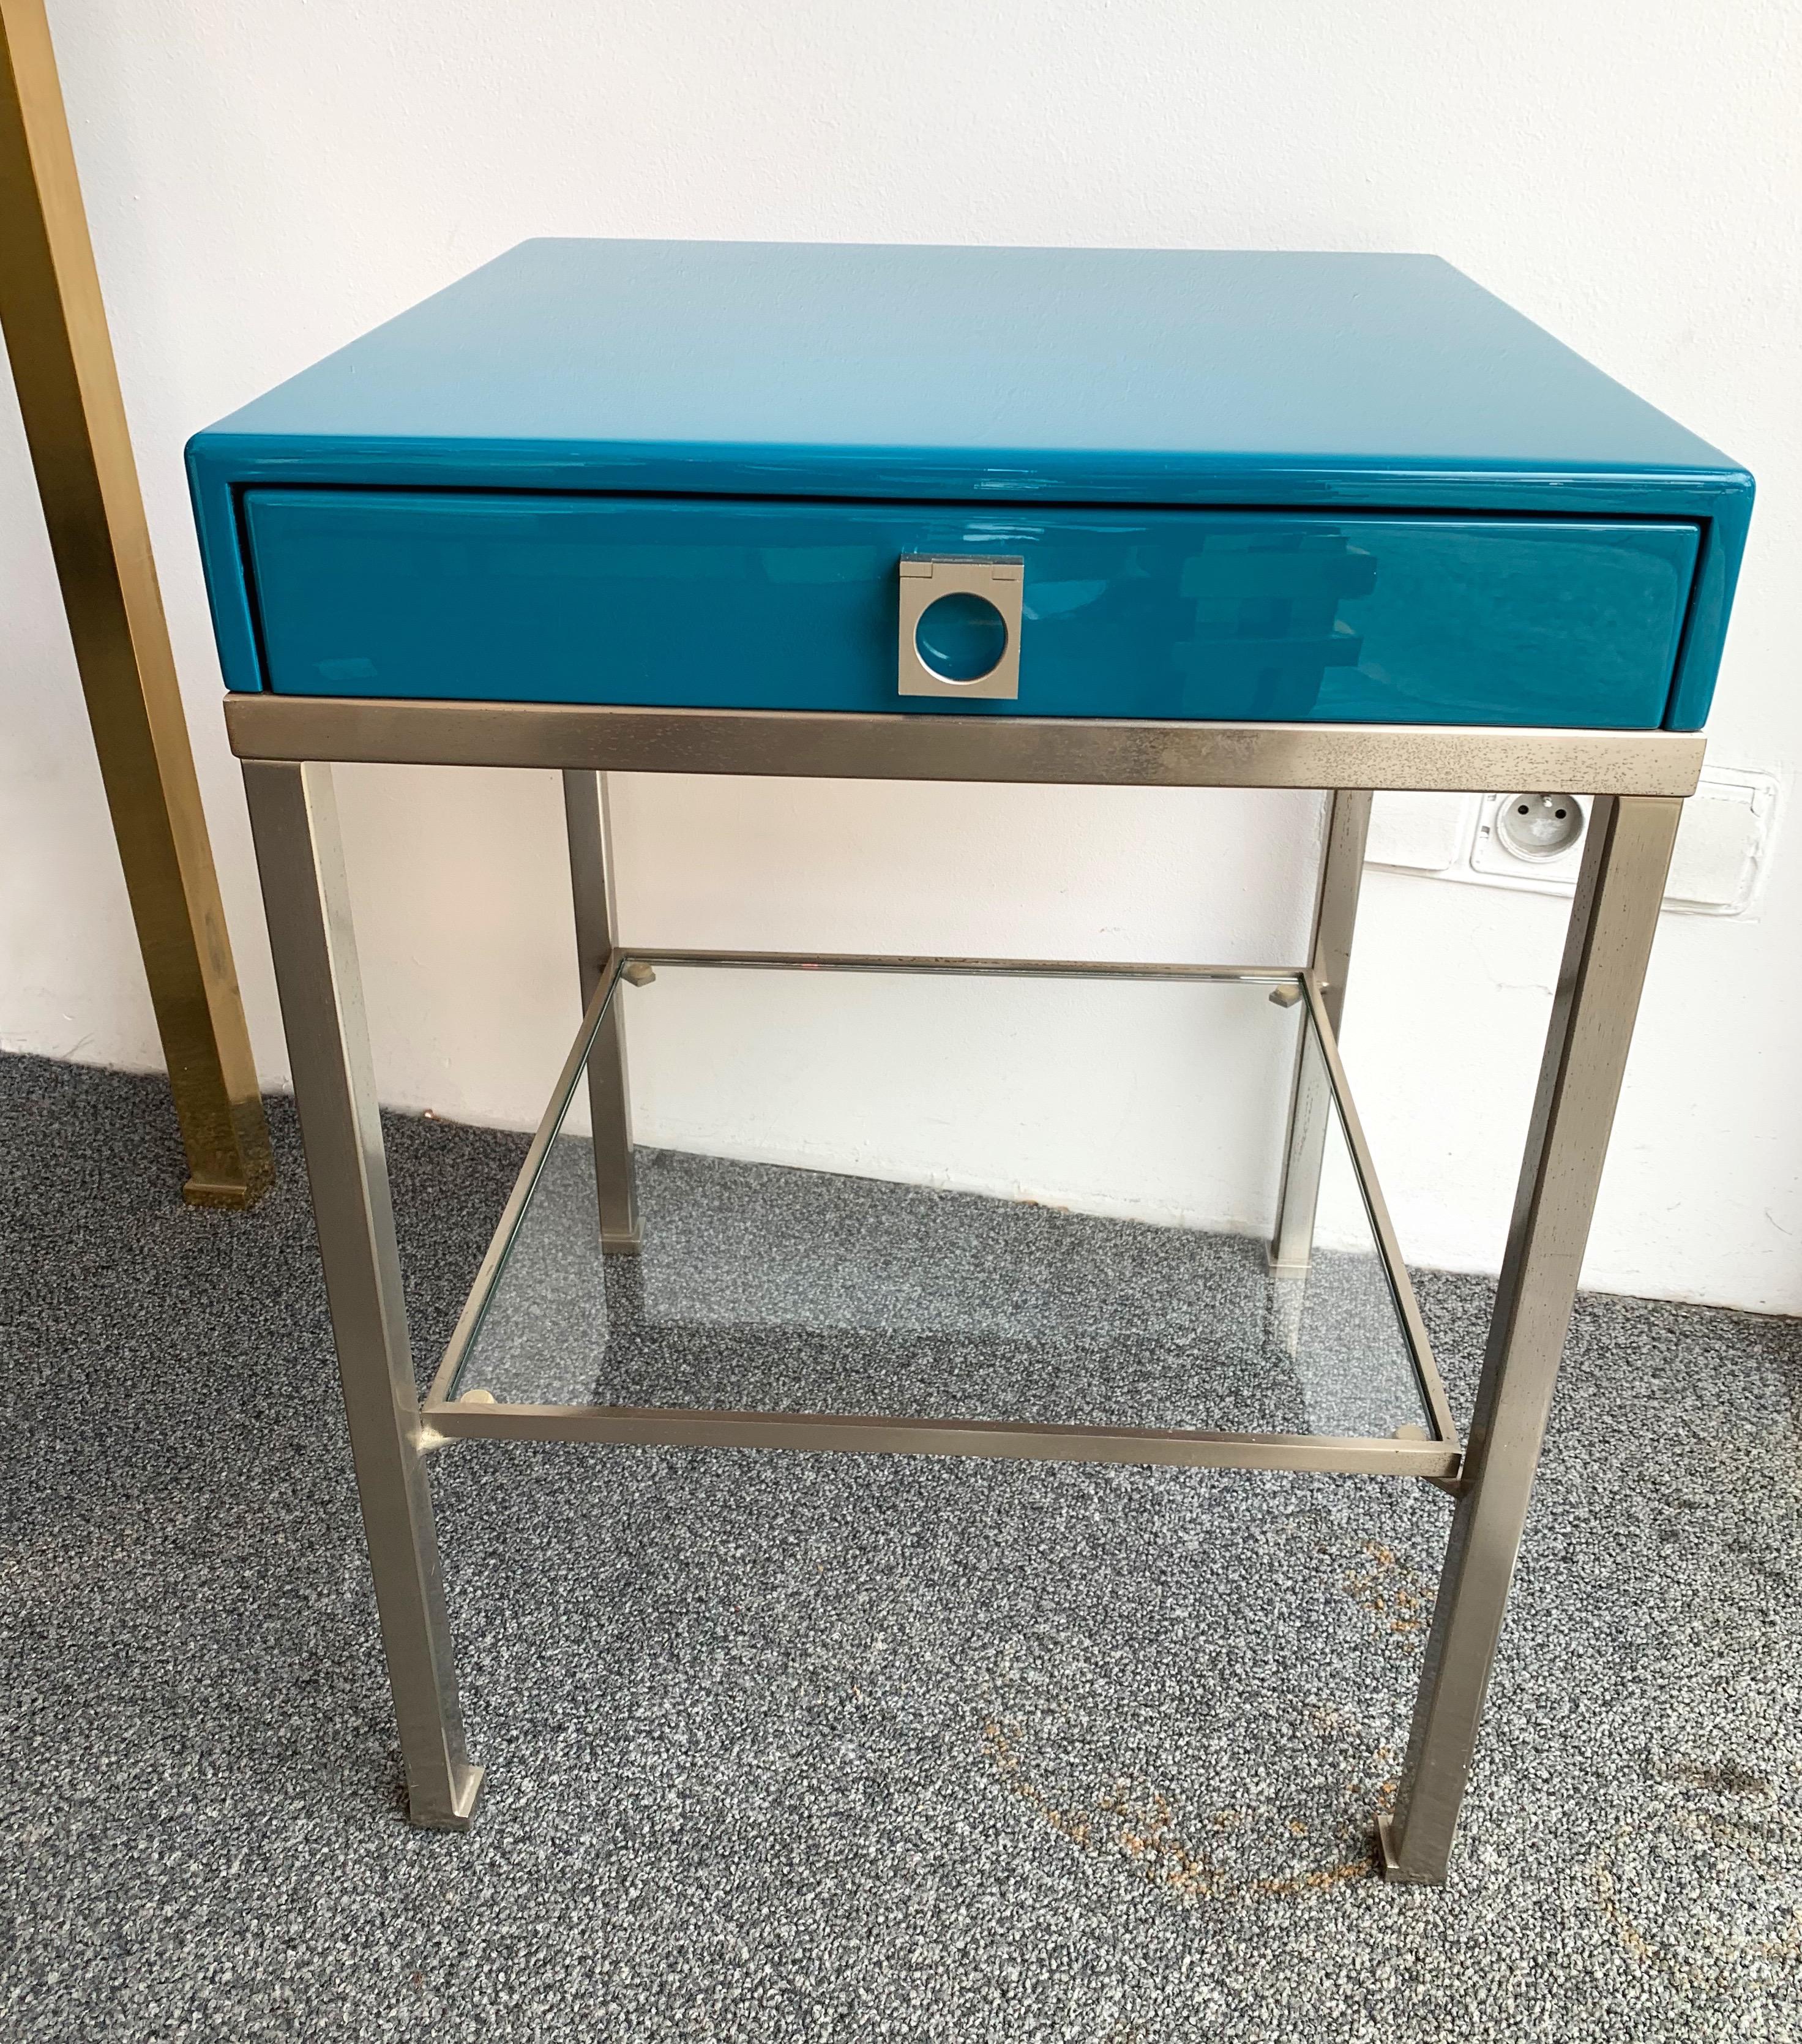 Pair of blue turquoise lacquered side end tables or nightstands by Guy Lefèvre. A part of his production was diffused by the Maison Jansen in Paris, nickeled brass feet, glass shelf. Famous design like Jean Claude Mahey, Willy Rizzo, Mario Sabot.